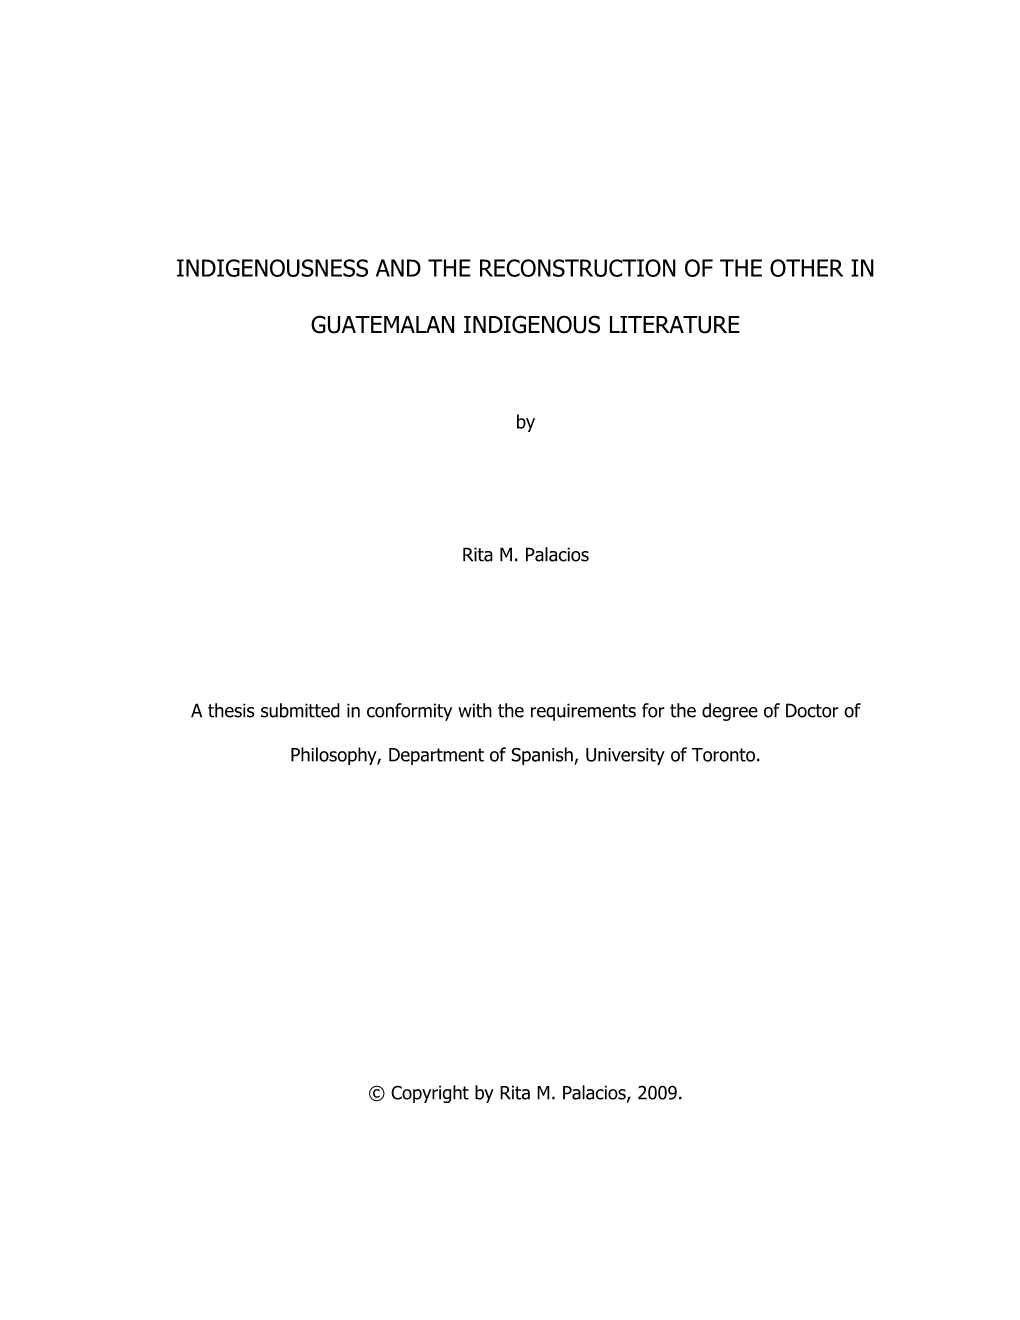 Indigenousness and the Reconstruction of the Other In